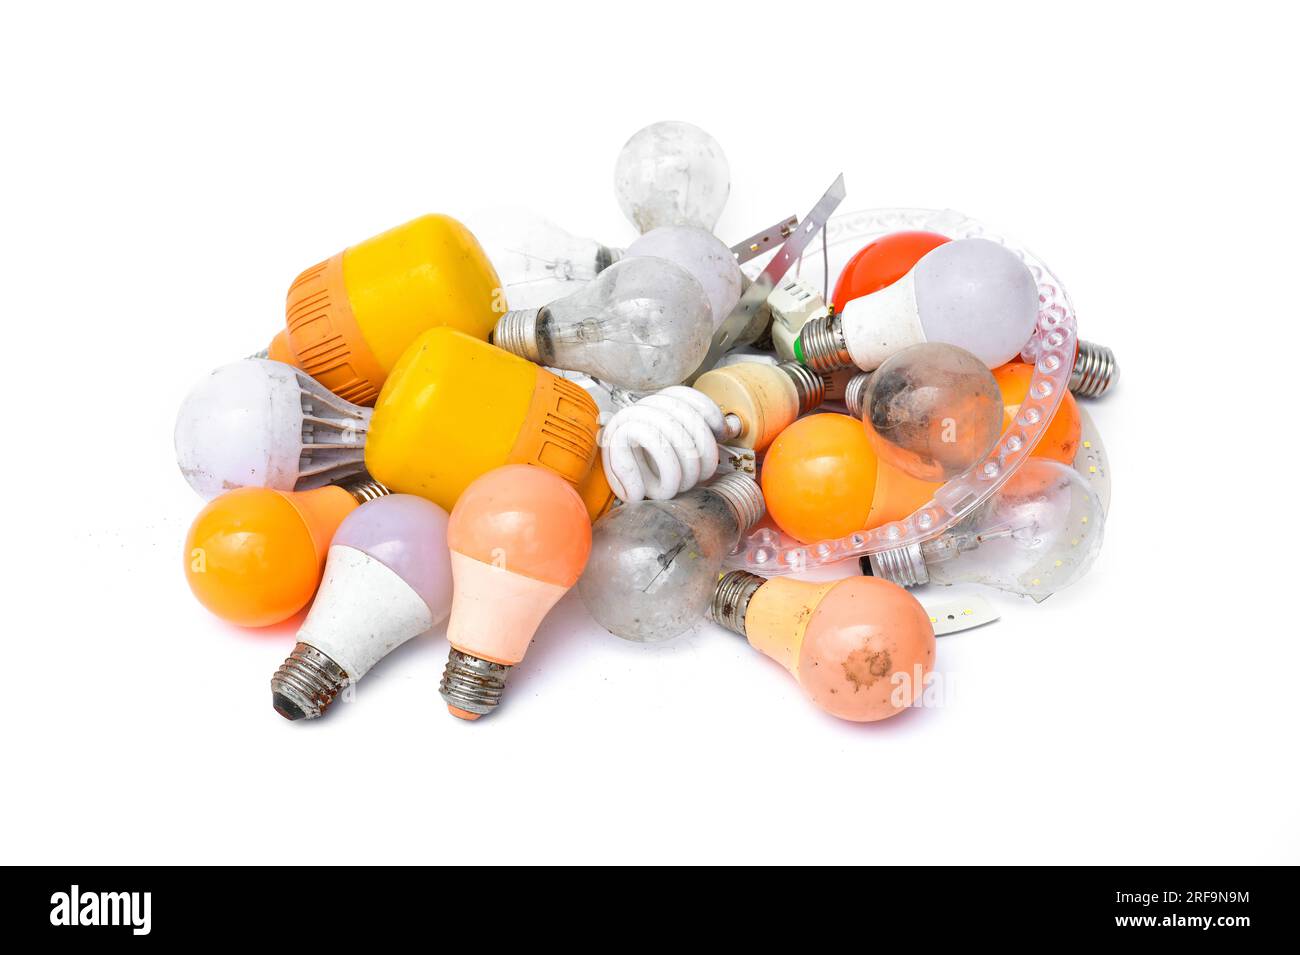 Pile of garbage Used and disposed of light incandescent bulb and energy saving lamps (LED) expired from use isolated on white background. Stock Photo